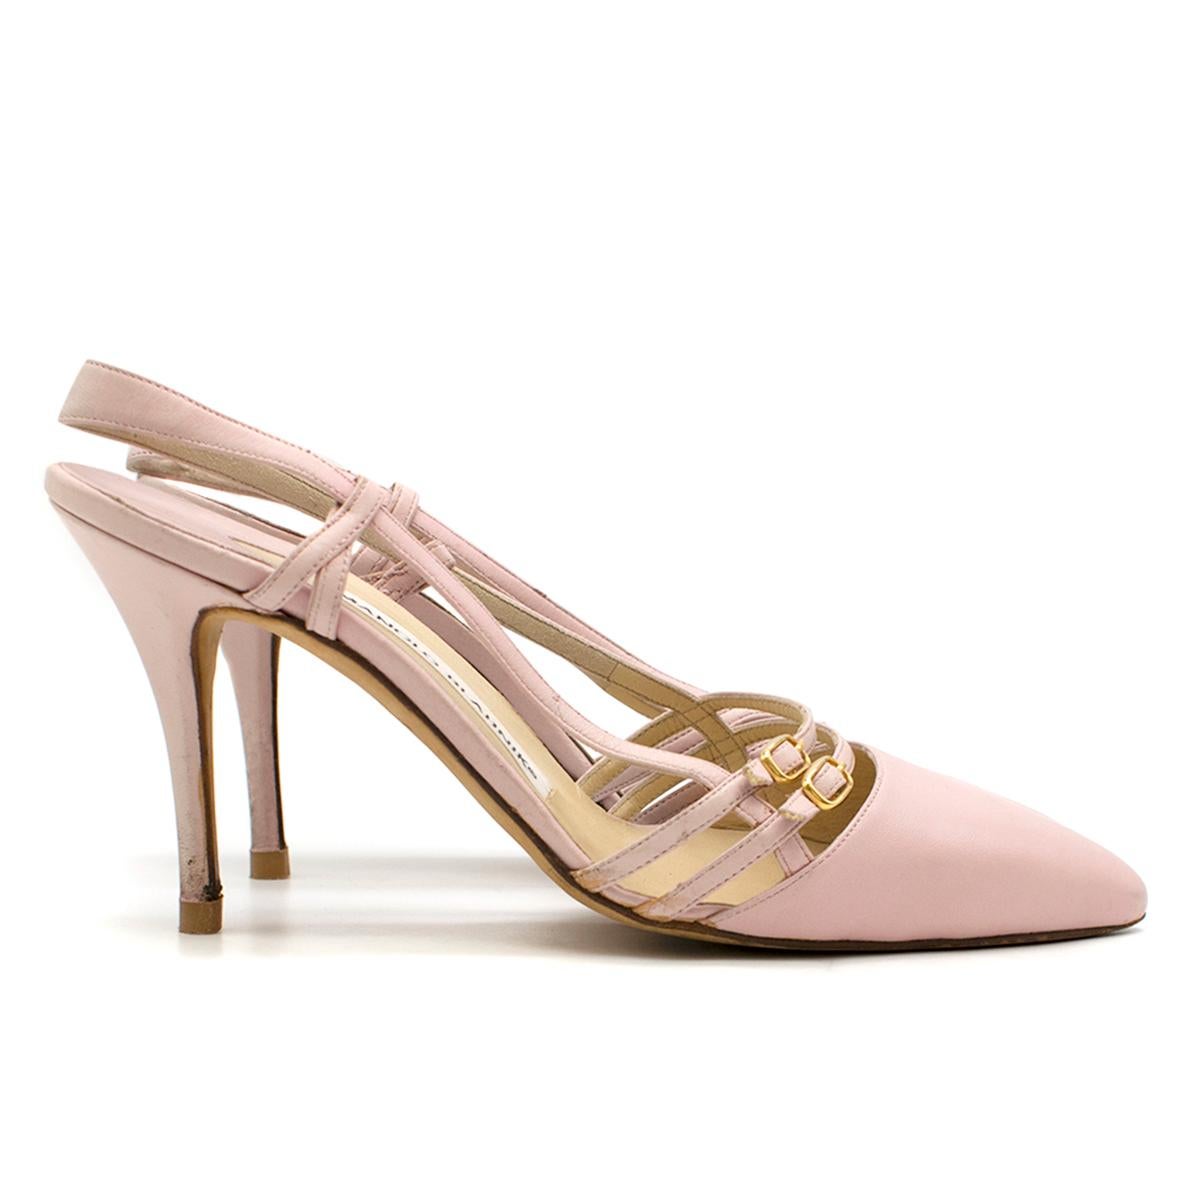 Manolo Blahnik Pink Buckle Detail Slingback Sandals 

- Pink Mule Pumps 
- Silngback stretch fastening 
- Point toe, slim toeline 
- Dual strap detail with gold toned buckle at front 
- Leather covered heel 
- Beige leather lining and sole 

Please